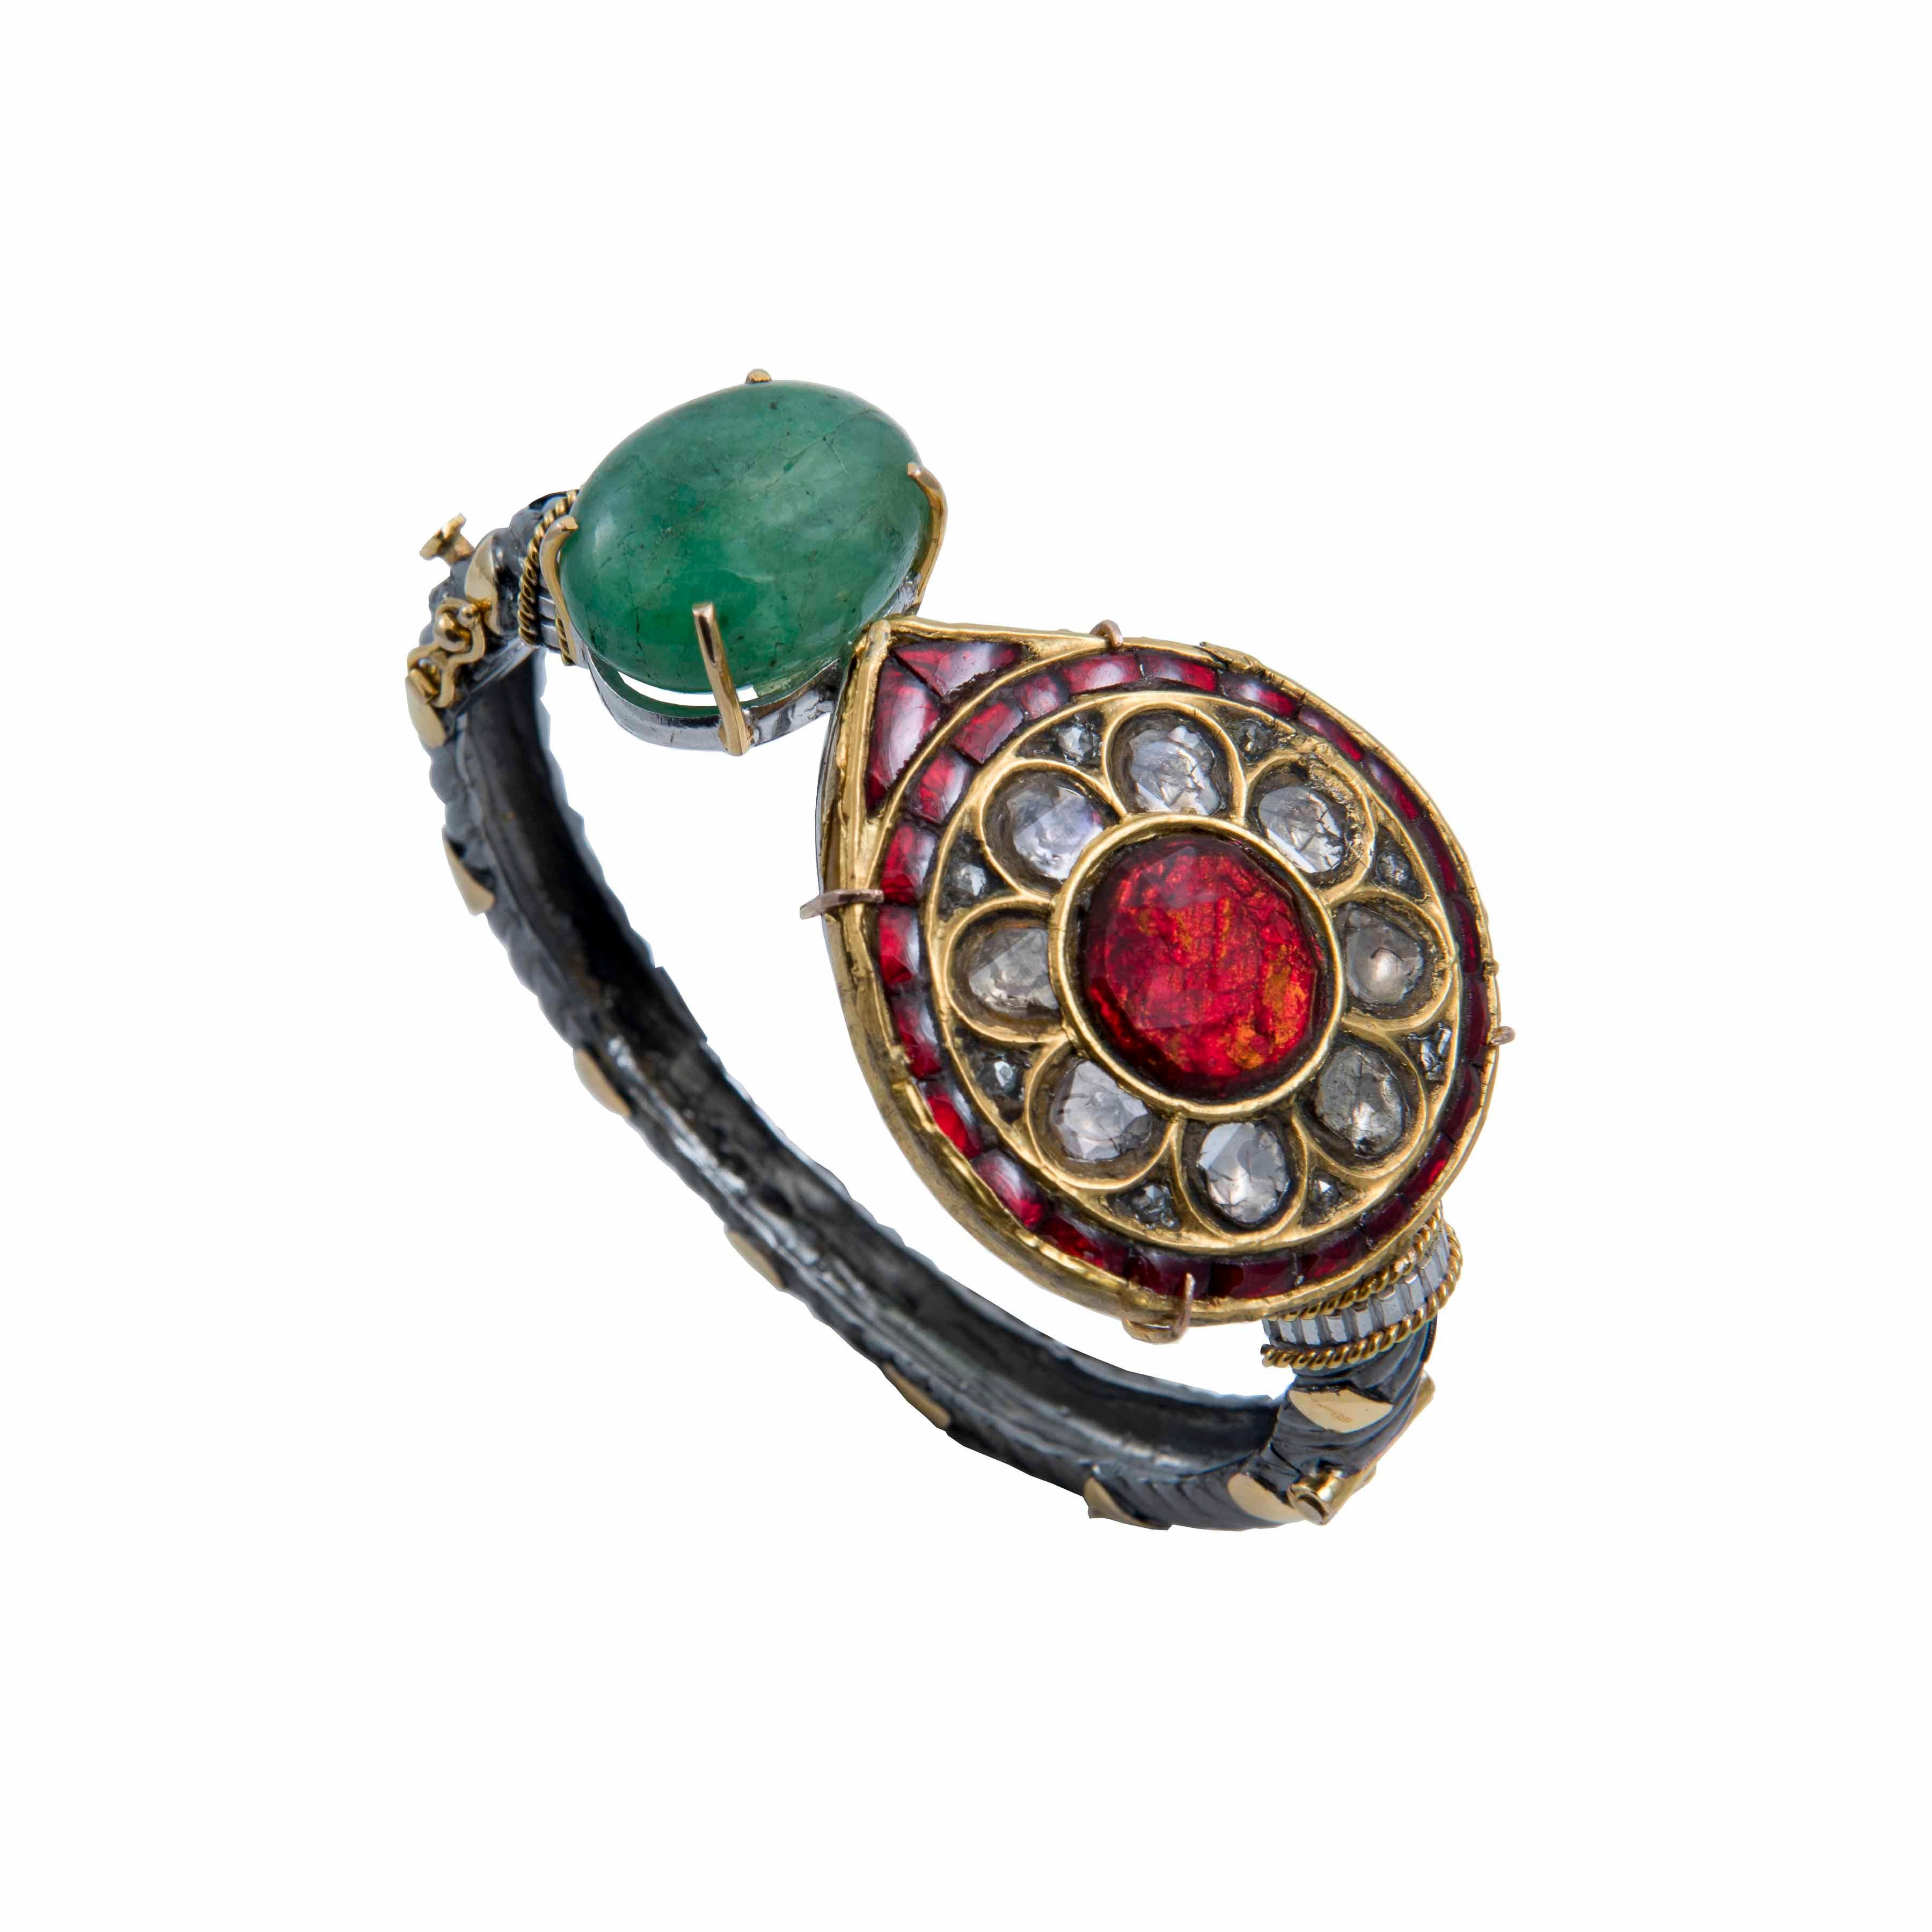 This bracelet from Iconic series of the brand, showcases a flirty interplay of black chrome plated pure silver band with 18k gold work on it, and a handcrafted Ruby and Polki (uncut diamonds) vintage finish centrepiece Paisley set in 18k gold.